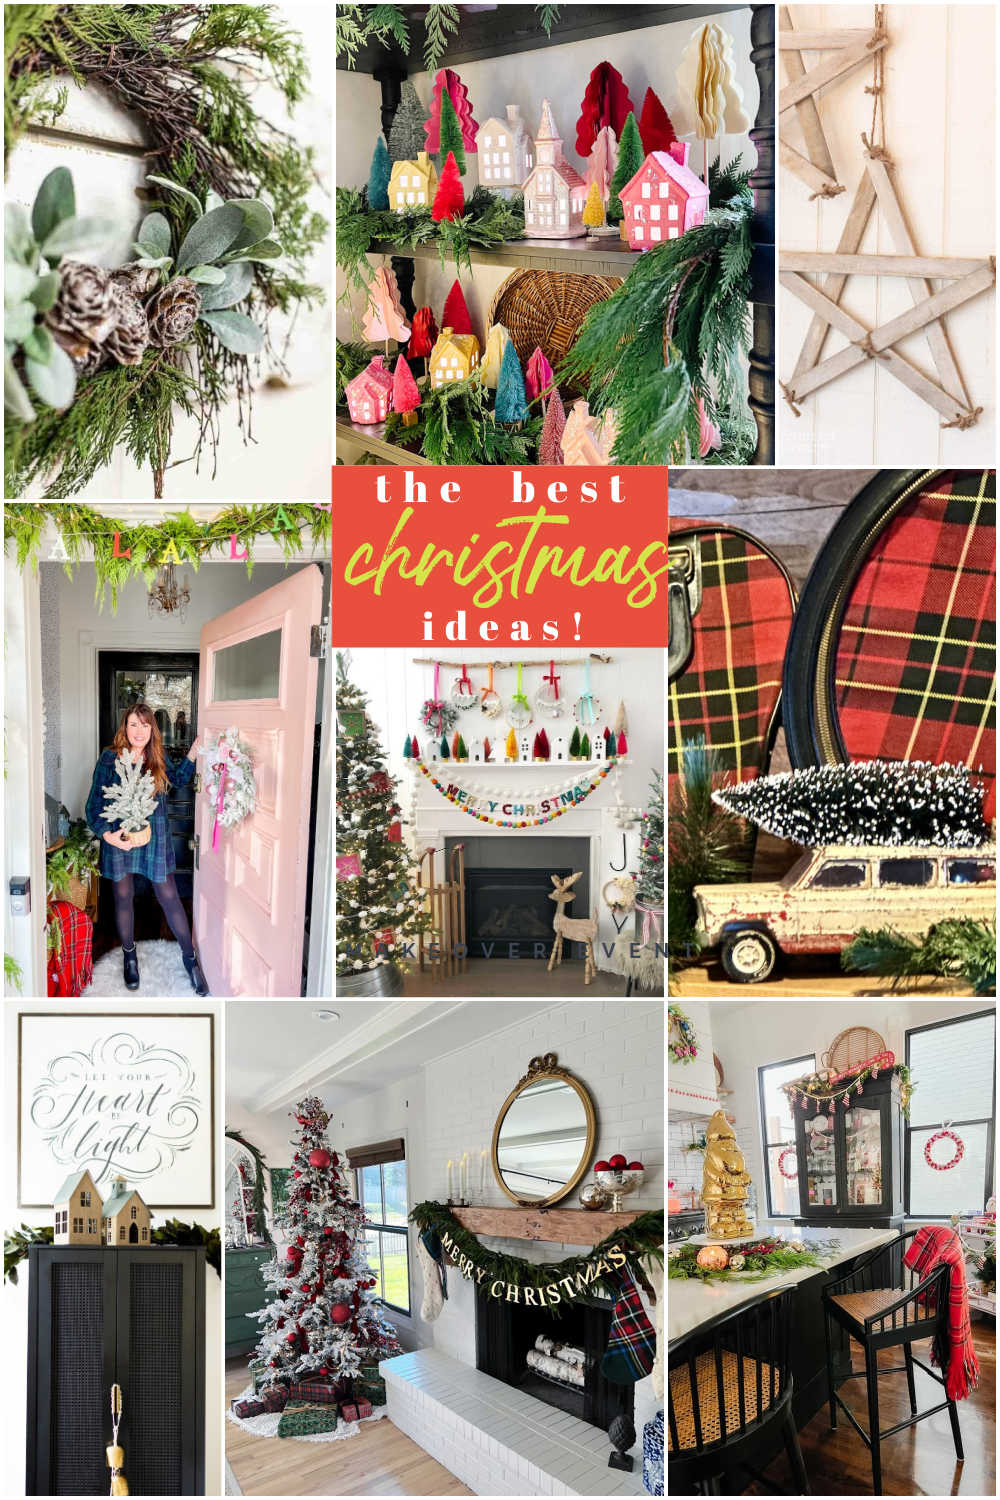 The Best Christmas Ideas! Easy DIY and decorating ideas to create the ultimate Christmas feeling in YOUR home!